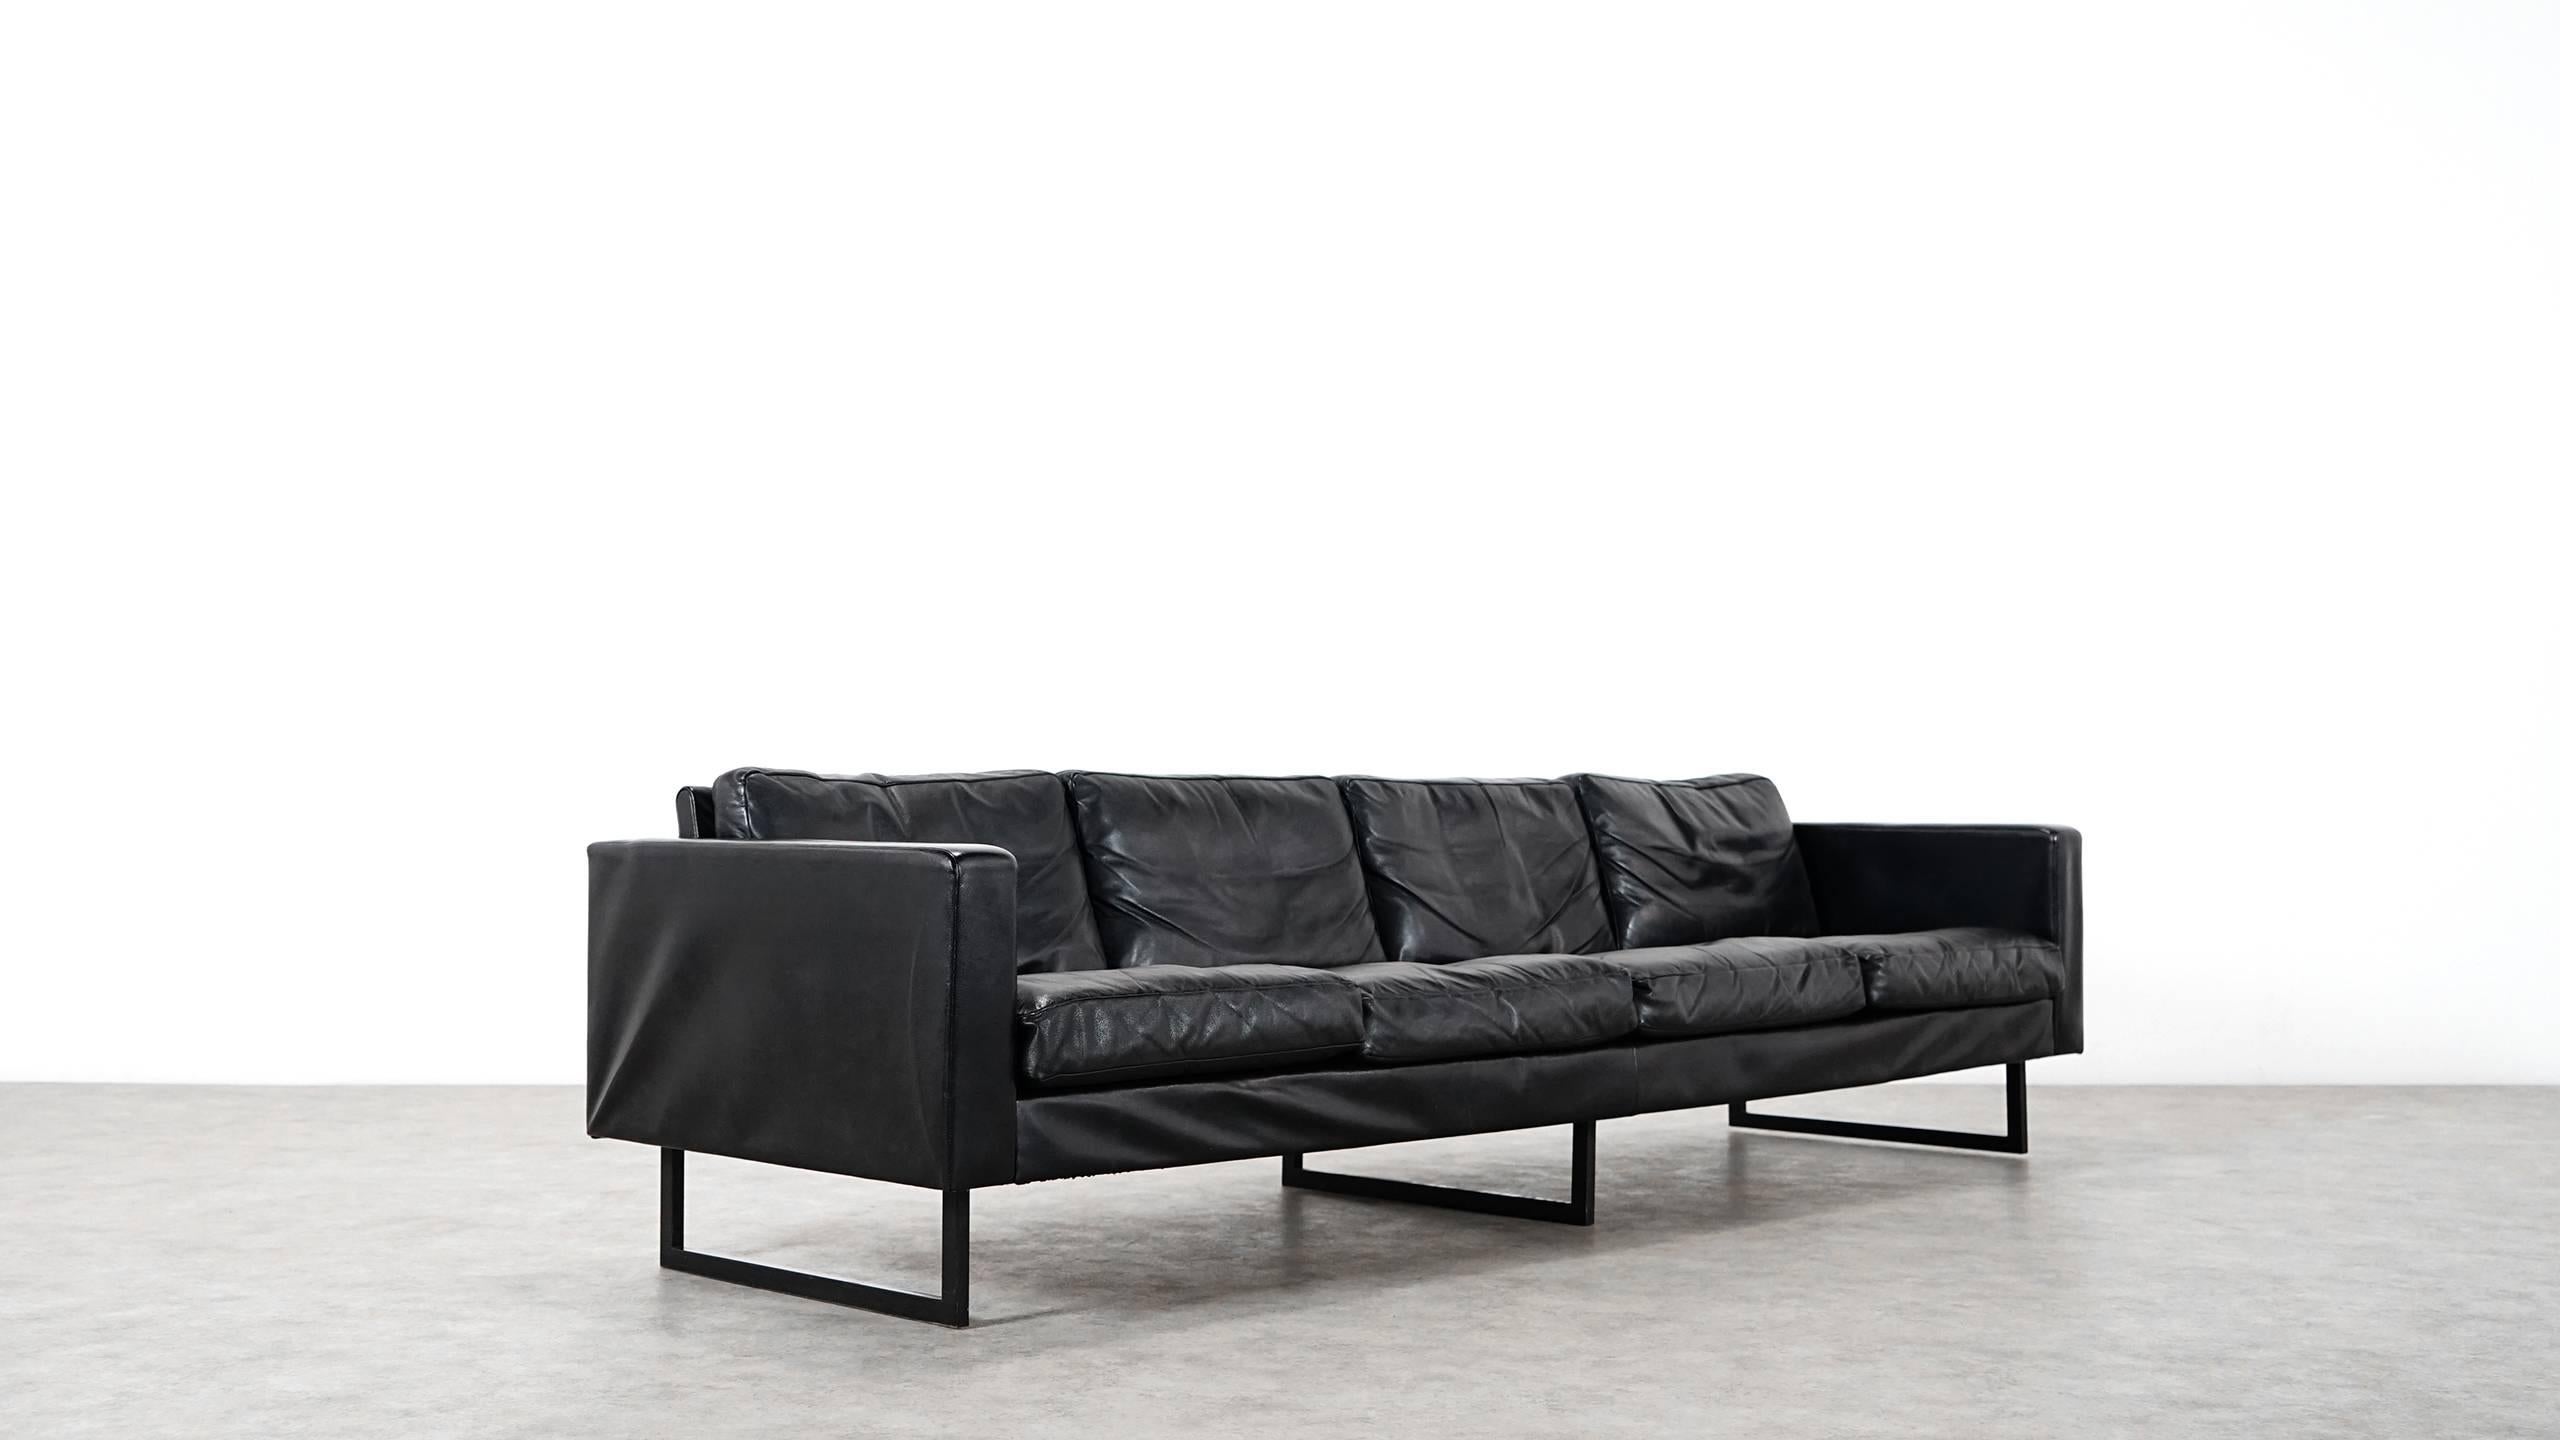 Absolutely rare three-seat by Carl Auböck for COR - in smooth black leather.....called 